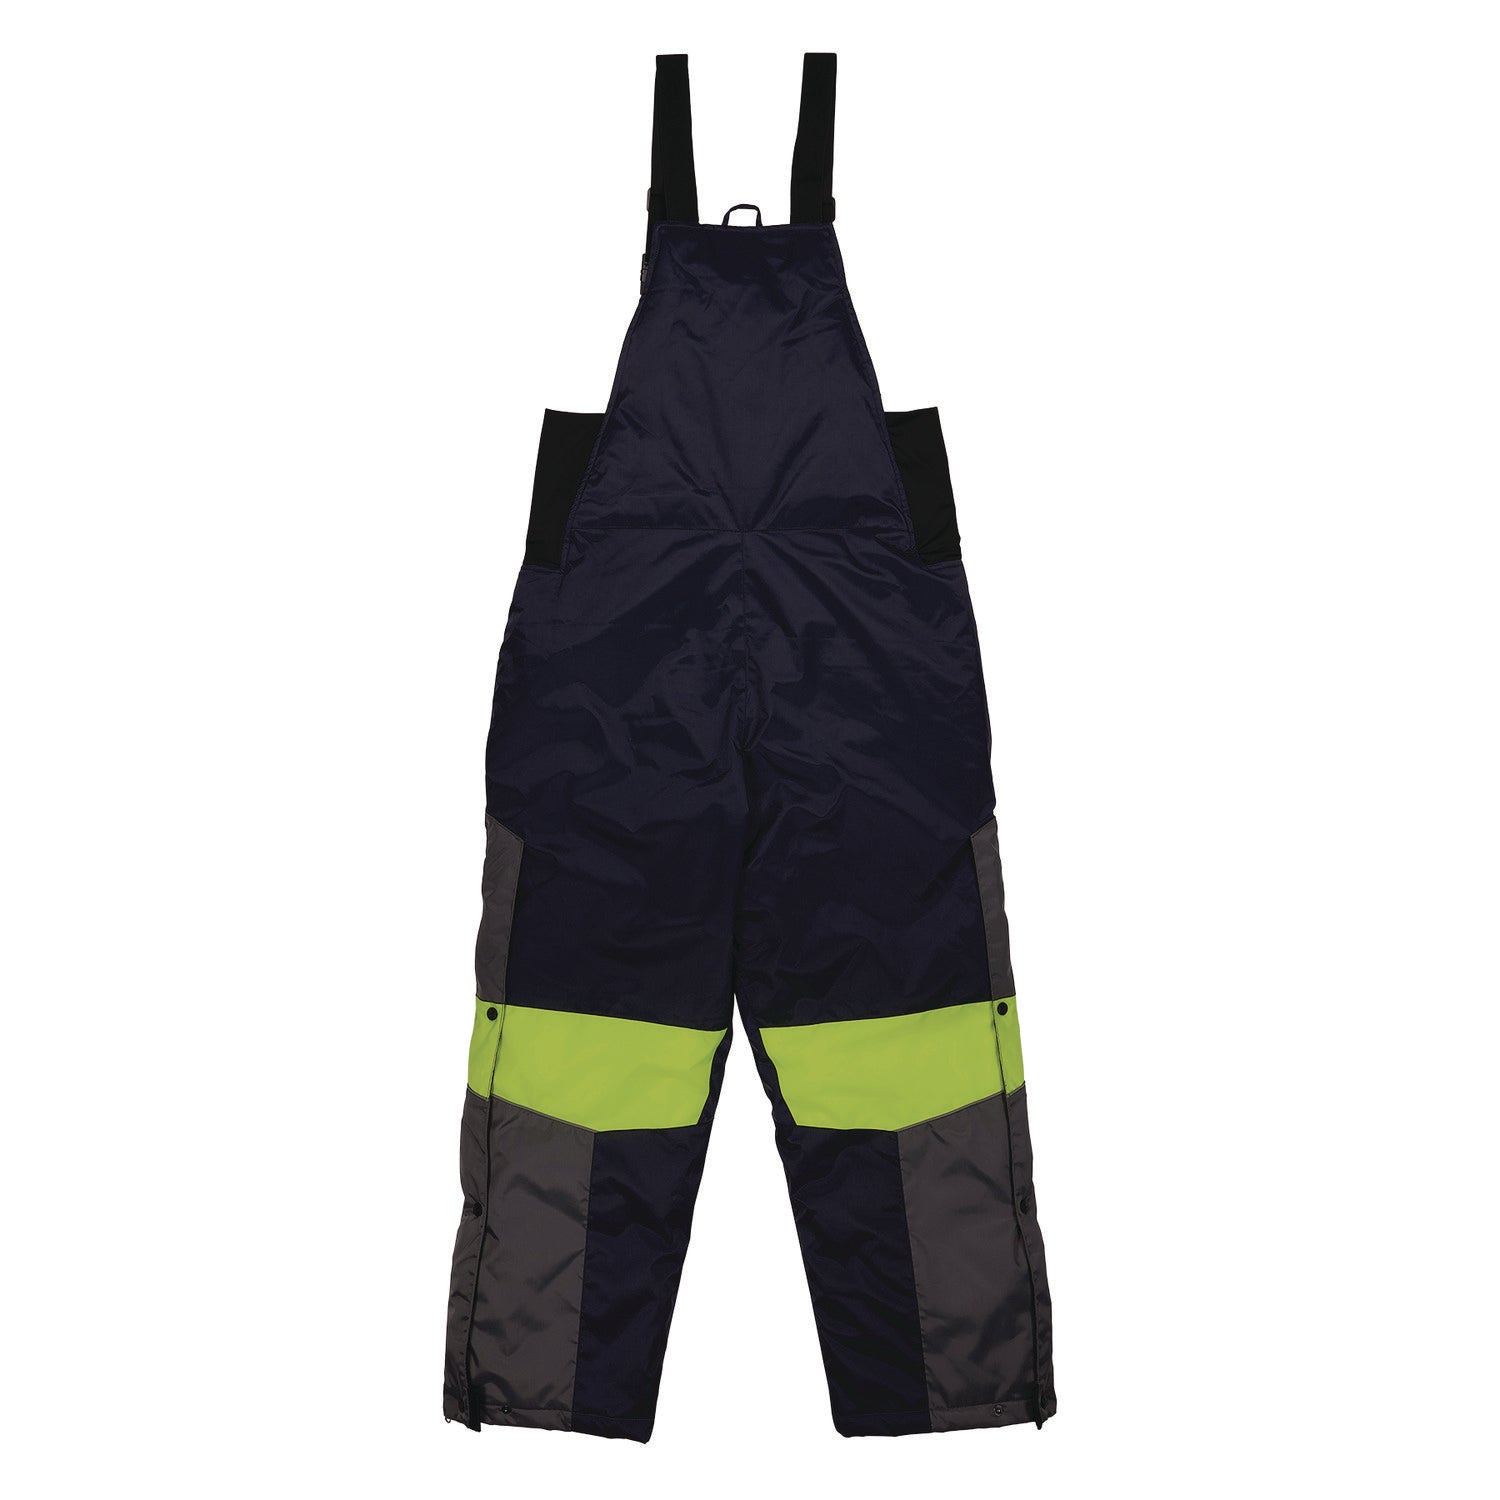 n-ferno-6477-insulated-cooler-bib-overall-4x-large-navy-ships-in-1-3-business-days_ego41268 - 2